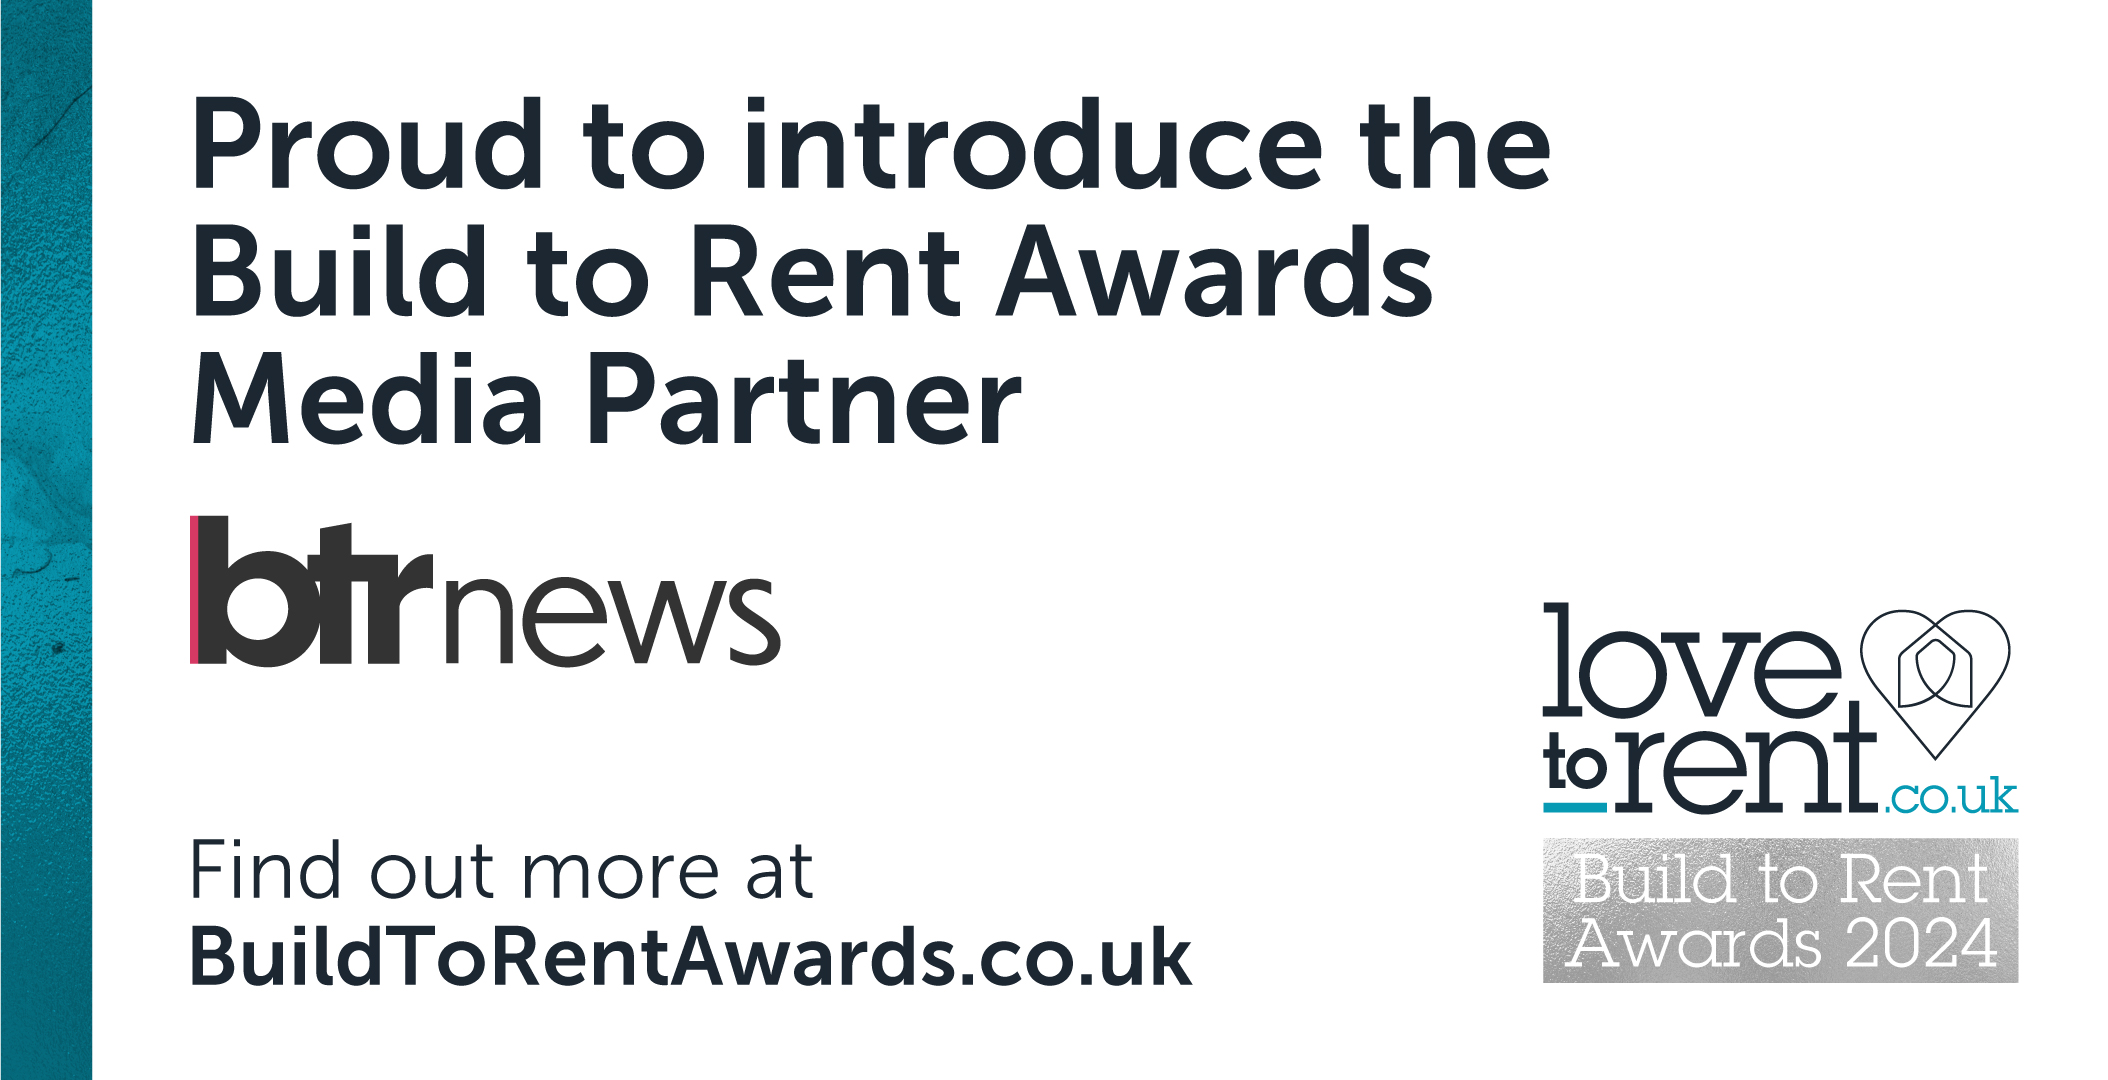 Media partner announced for Build to Rent Awards